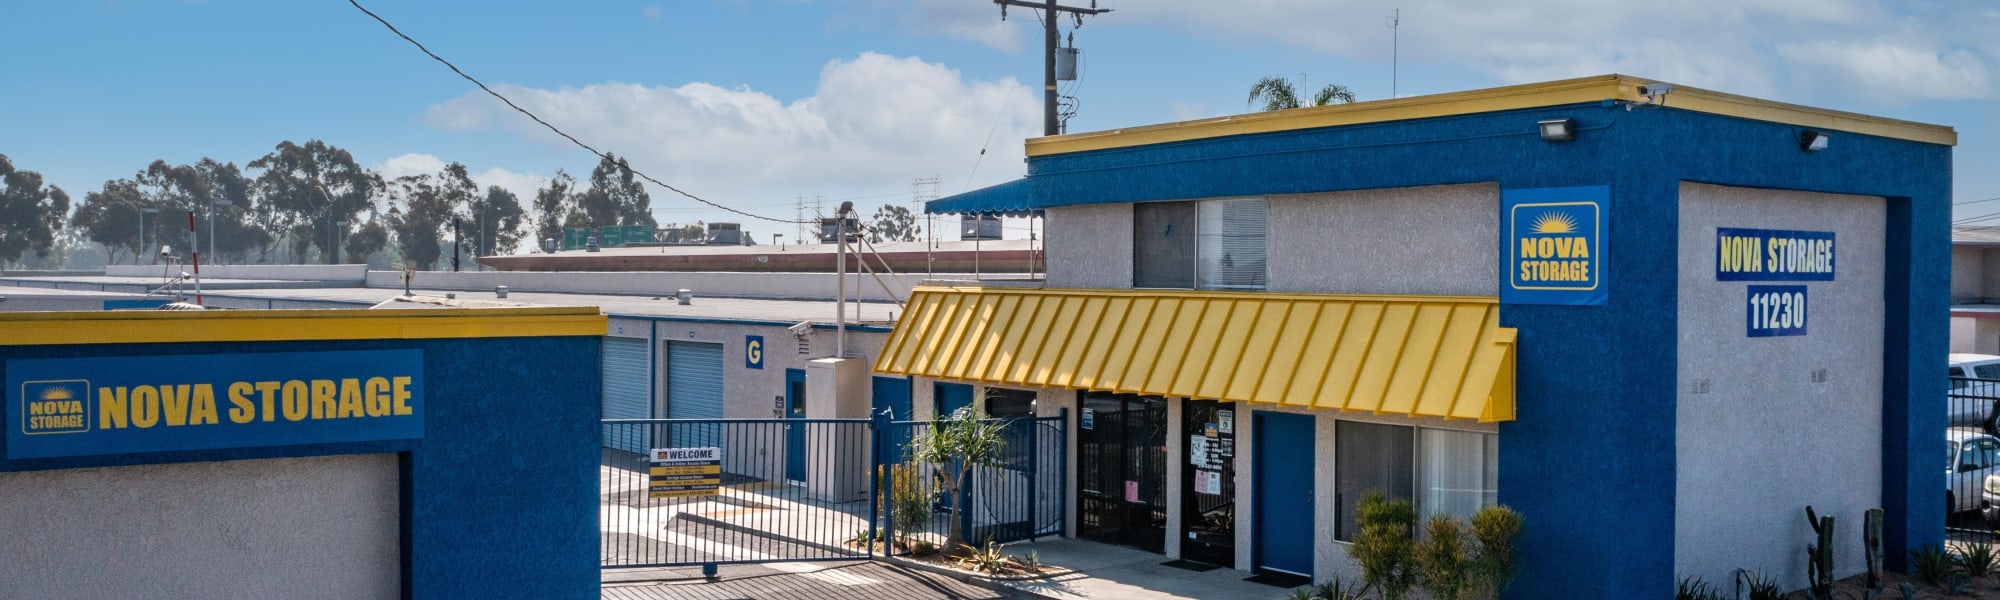 Hours and directions for Nova Storage in Lynwood, California